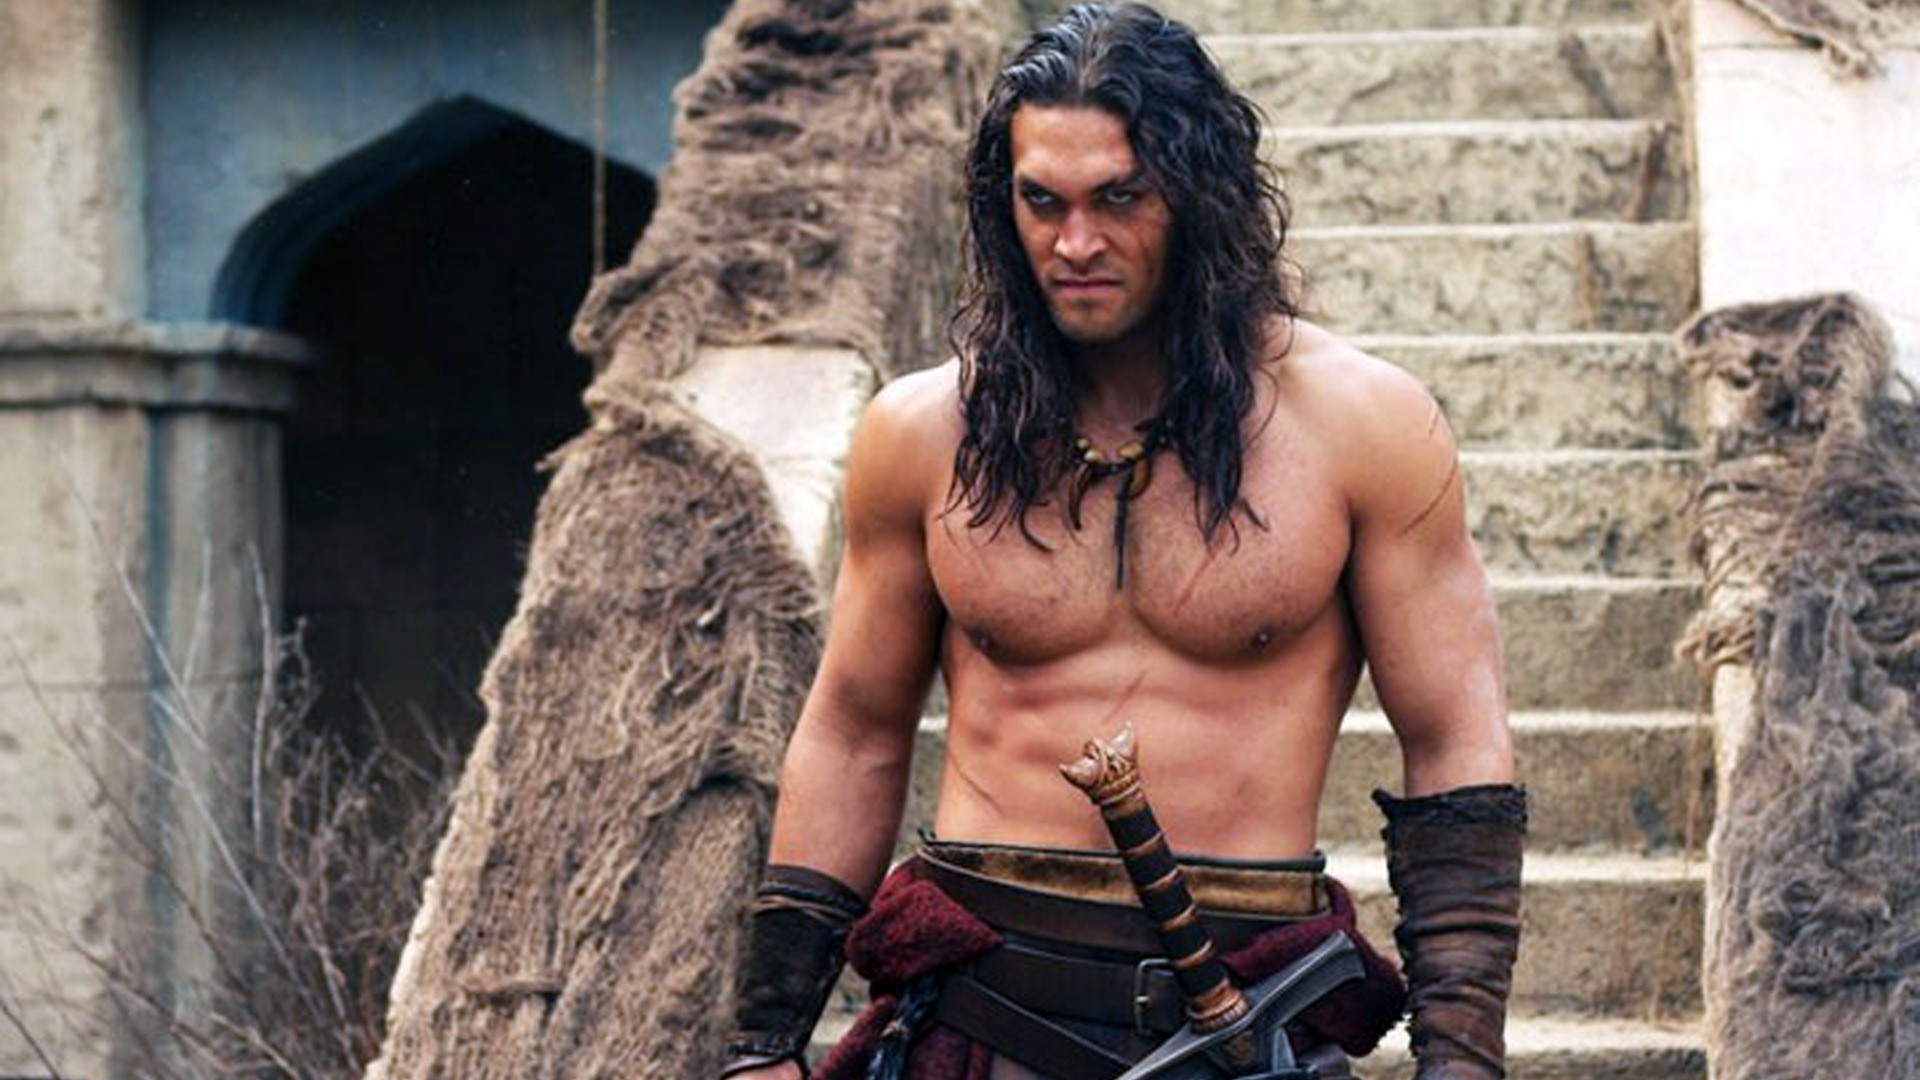 <p>Arnold Schwarzenegger’s “Conan the Barbarian” is one of the great he-man epics of the 1980s. The 2011 reboot starring Jason Momoa (best known as Khal Drogo) from “Game of Thrones” was a listless, CG-heavy bore that only made you want to go home and watch the original.</p> <p><a href='https://www.msn.com/en-us/community/channel/vid-cj9pqbr0vn9in2b6ddcd8sfgpfq6x6utp44fssrv6mc2gtybw0us'>Follow us on MSN to see more of our exclusive entertainment content.</a></p>